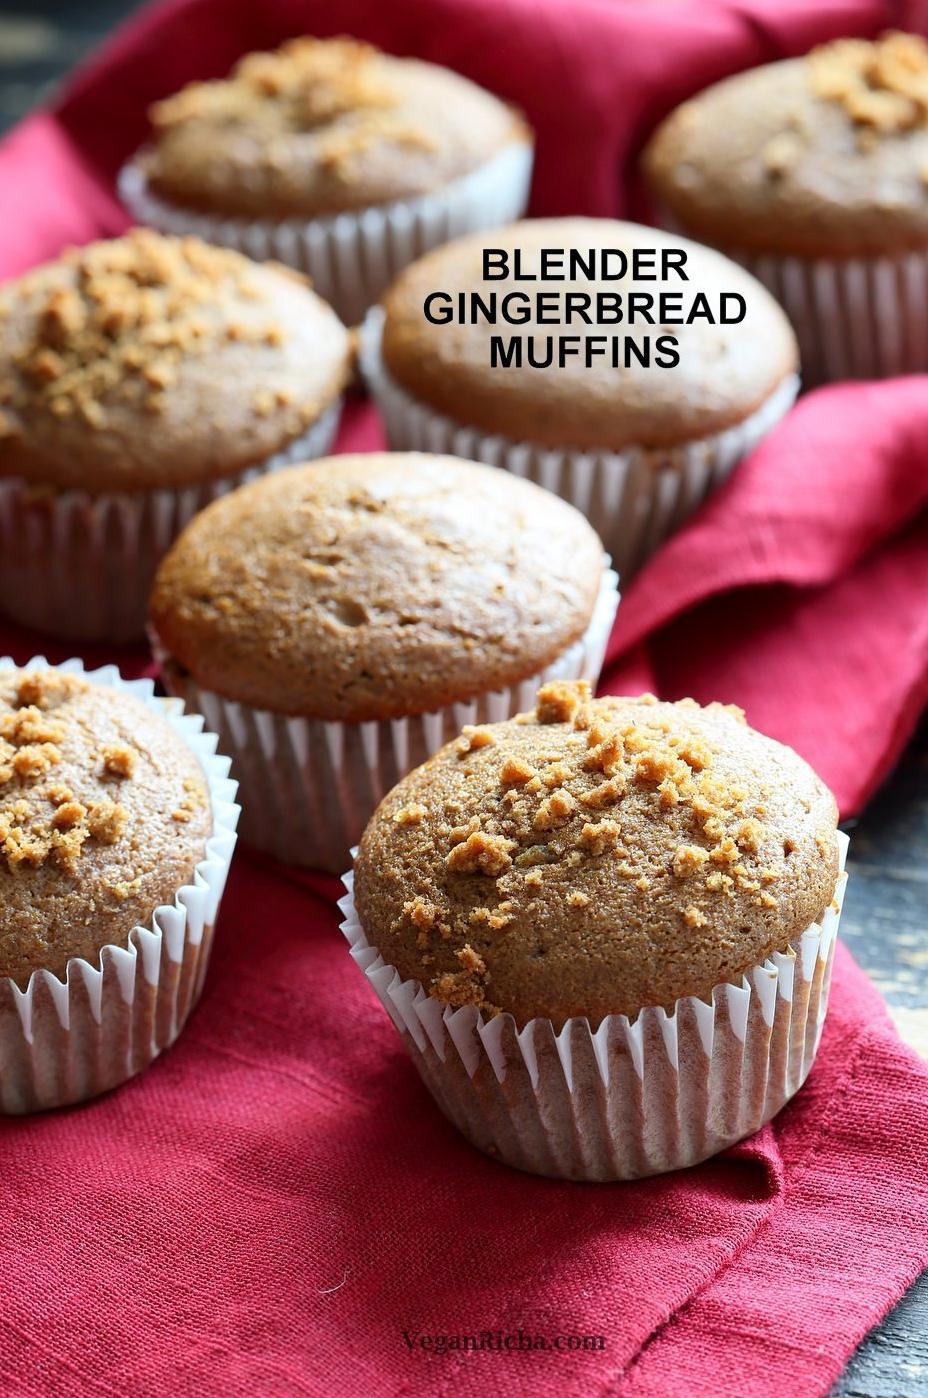  Indulge in these delicious muffins without worrying about gluten or dairy!